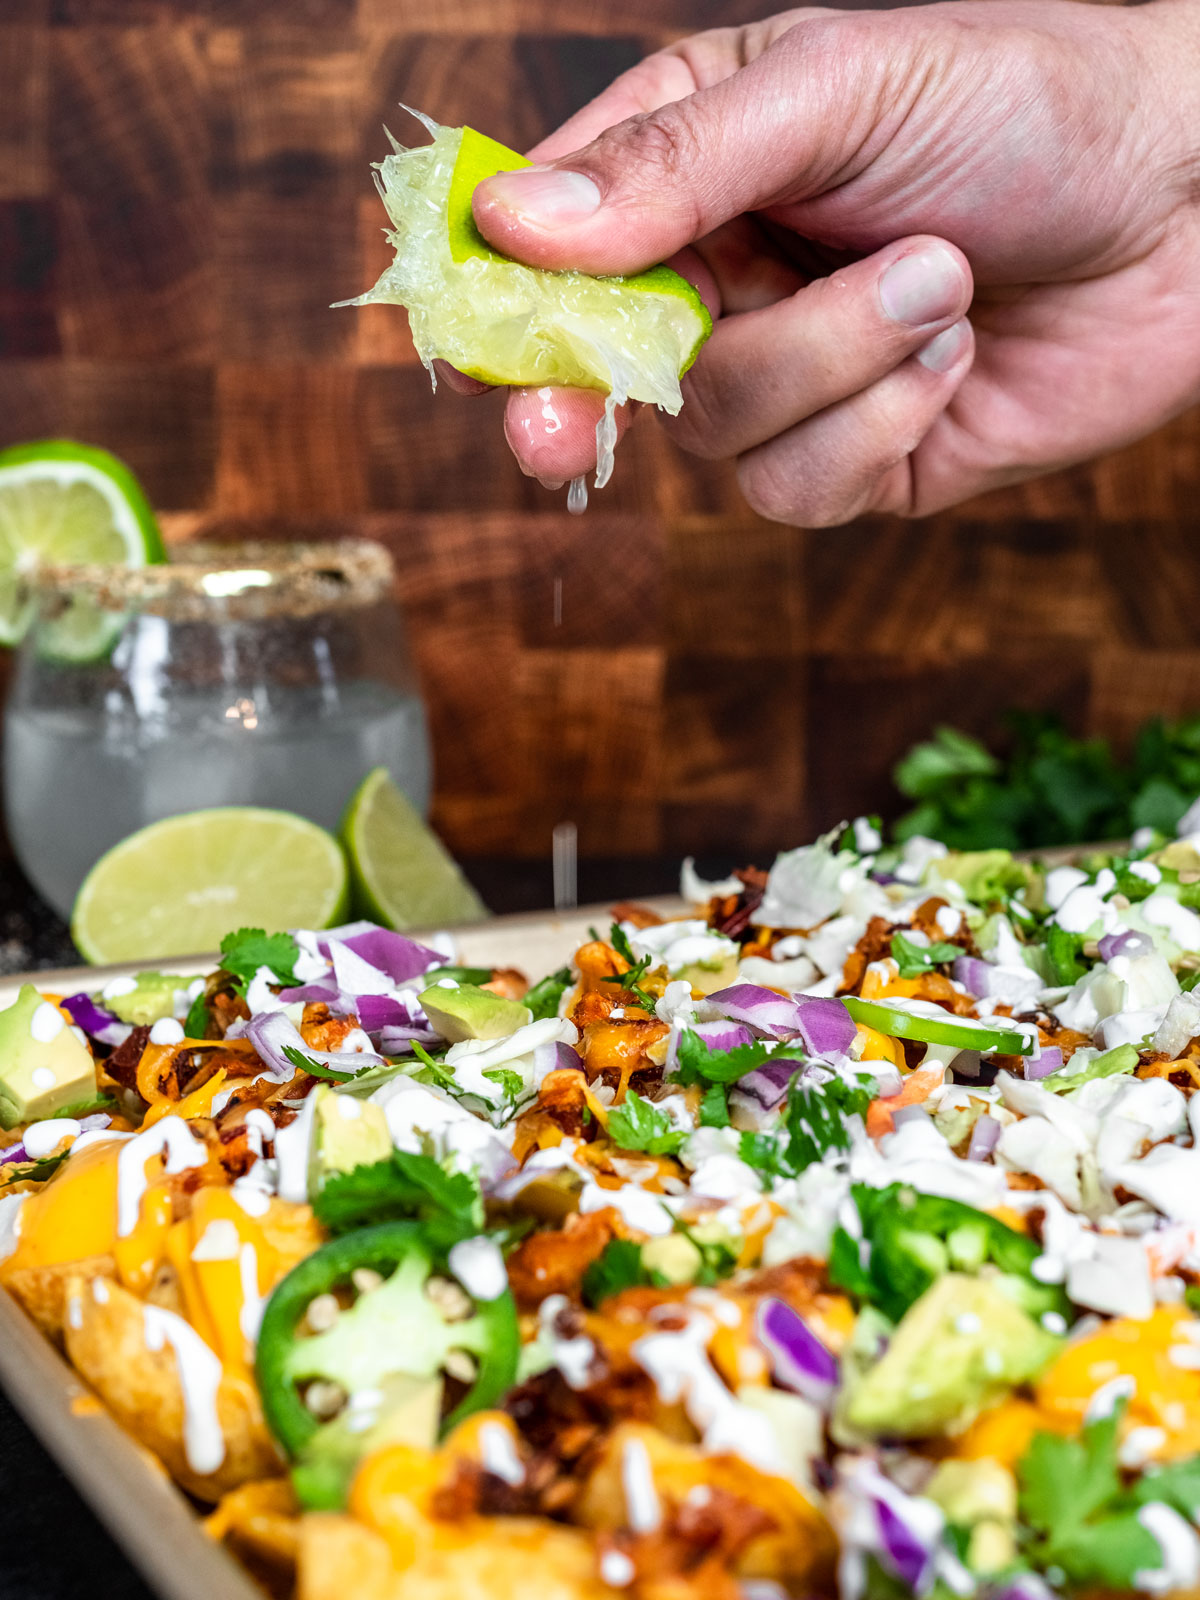 Adding lime to finish off the nachos and add an extra kick of flavor.